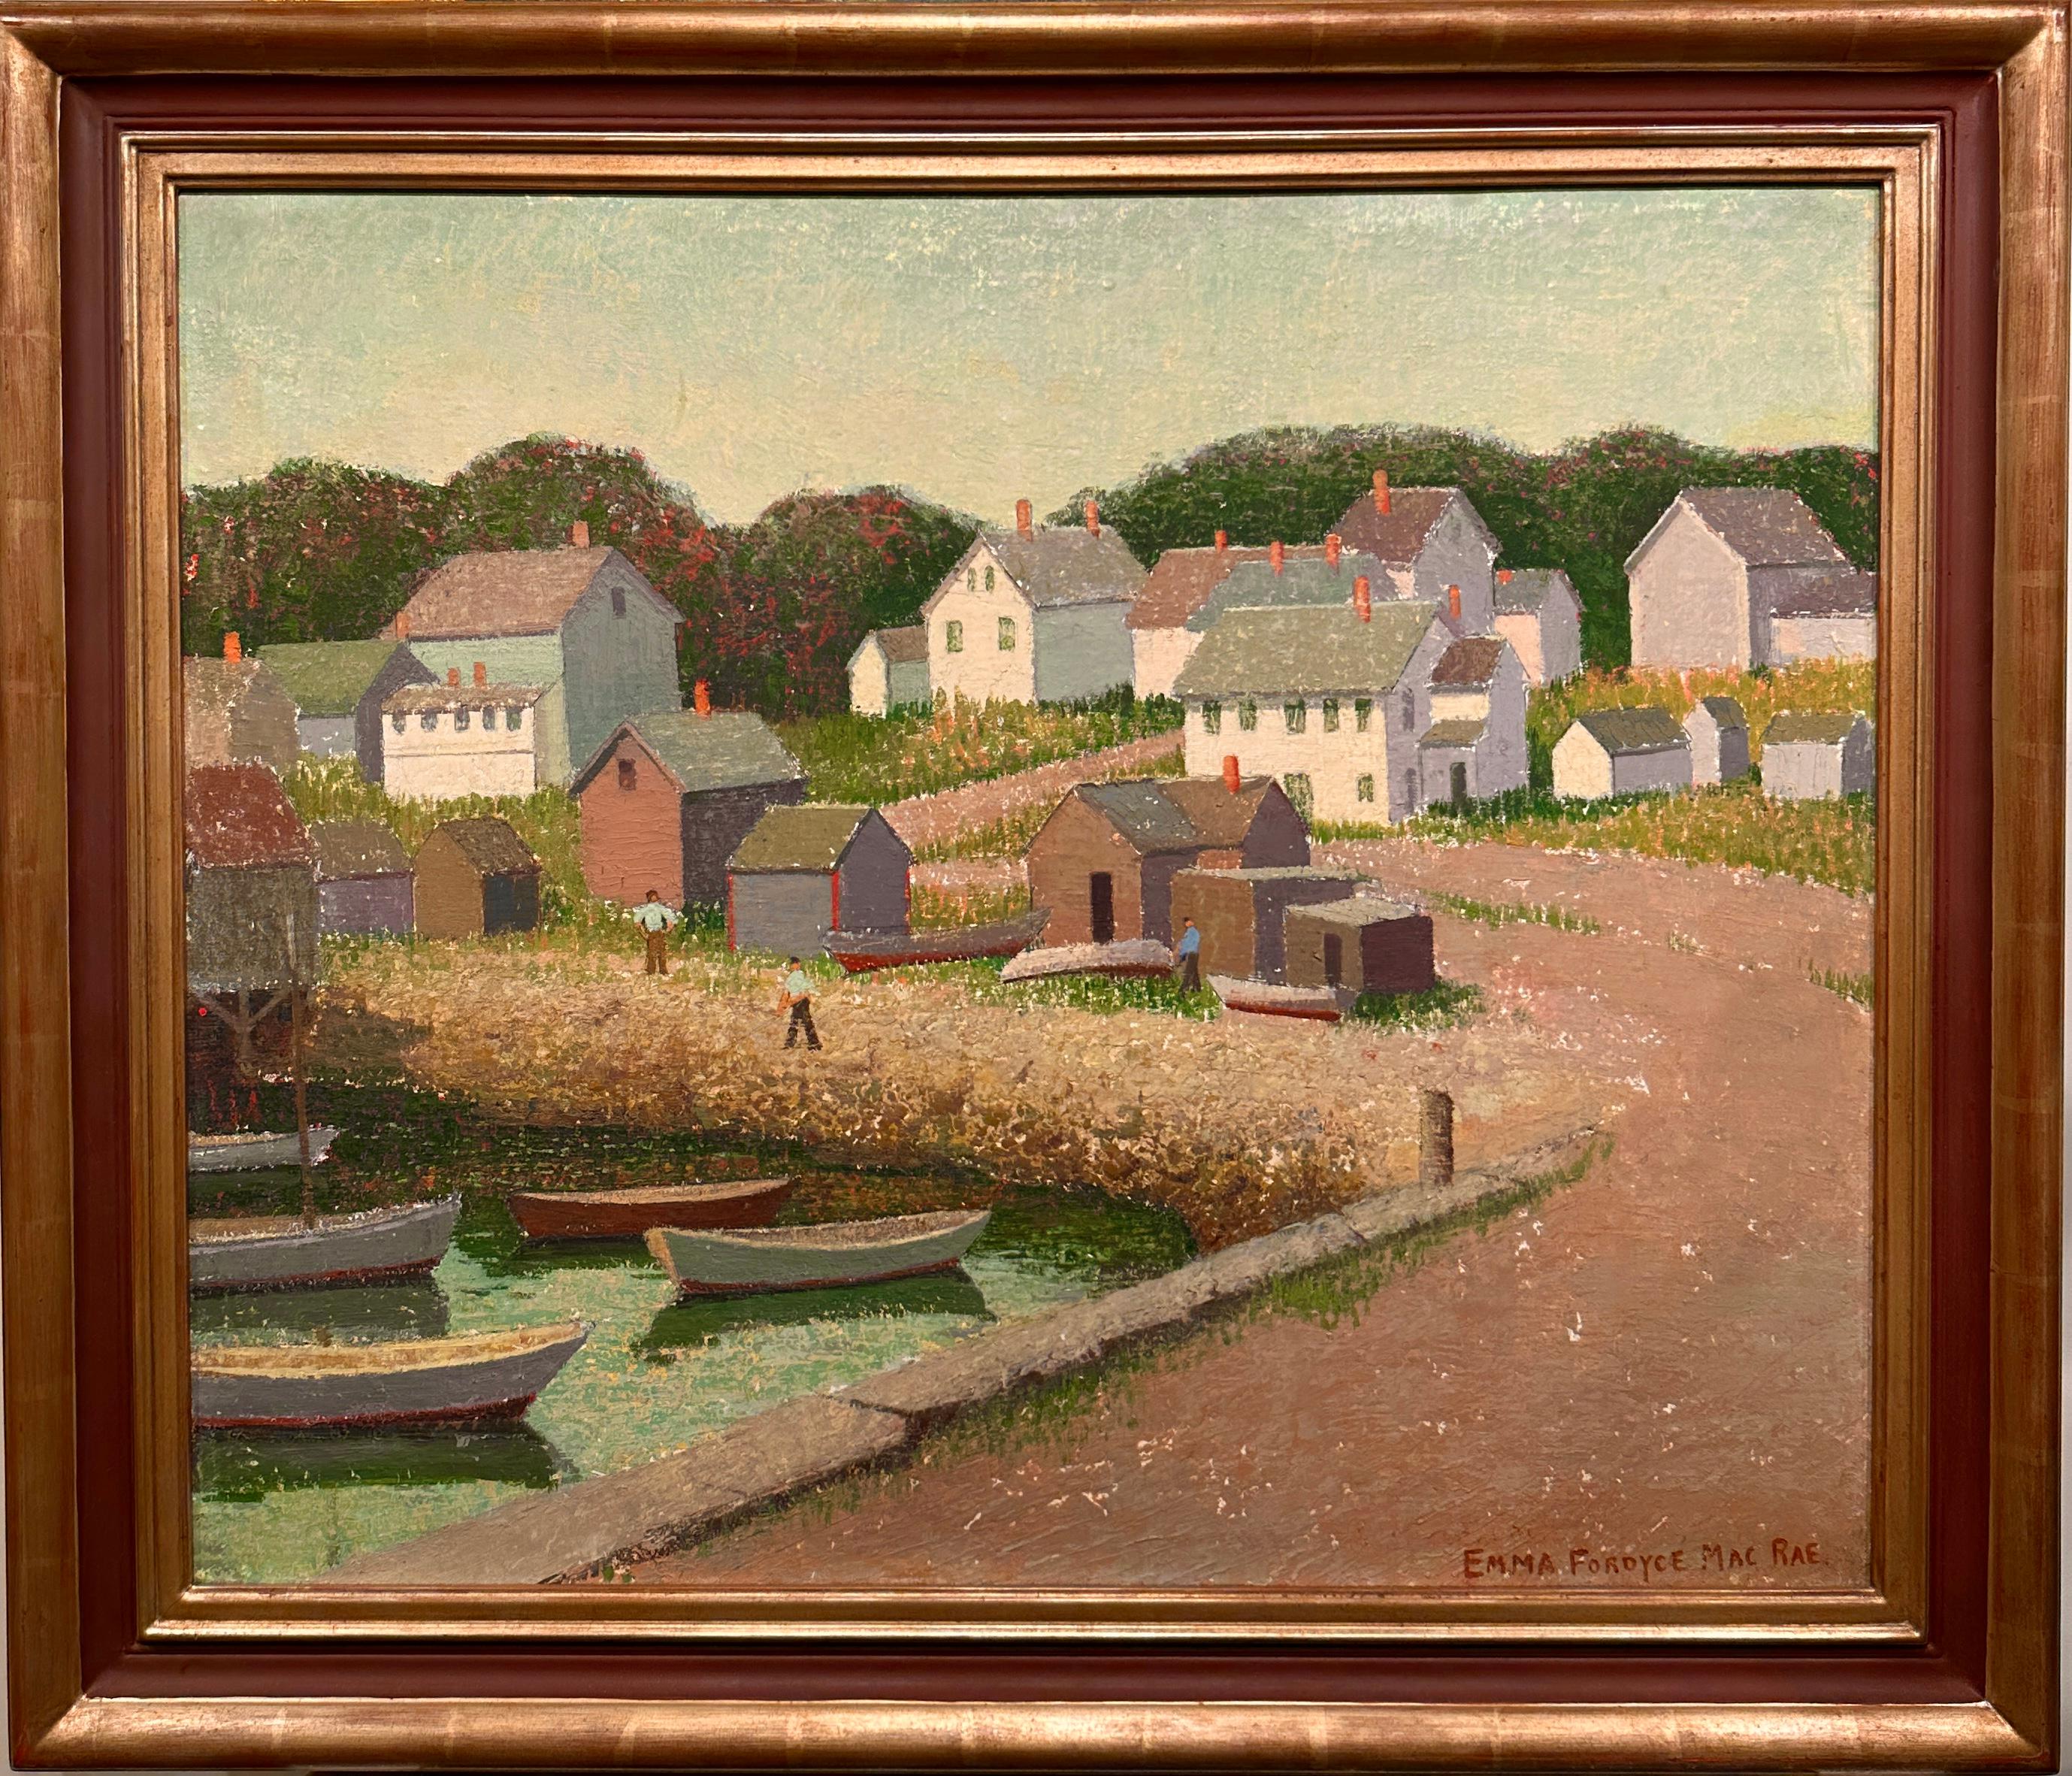 Fishermans Houses, Cape Ann Massachusetts Landscape with boats and figures  - Painting by Emma Fordyce MacRae